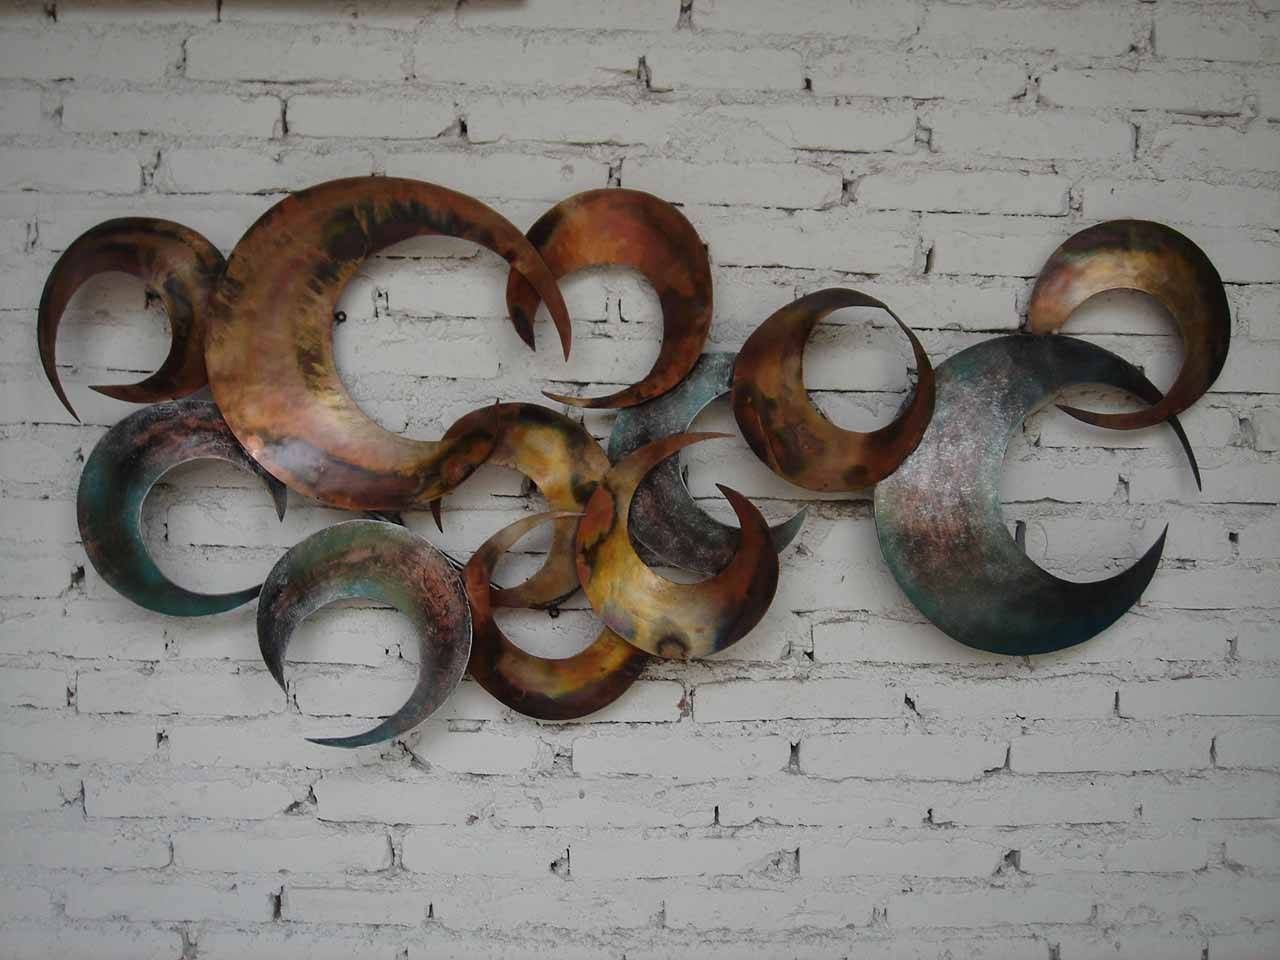 Scenic Metal Wall Decor Ideas Outdoor Metal Wall Art Metald Decor In Latest Metal Wall Art Decor And Sculptures (View 6 of 20)